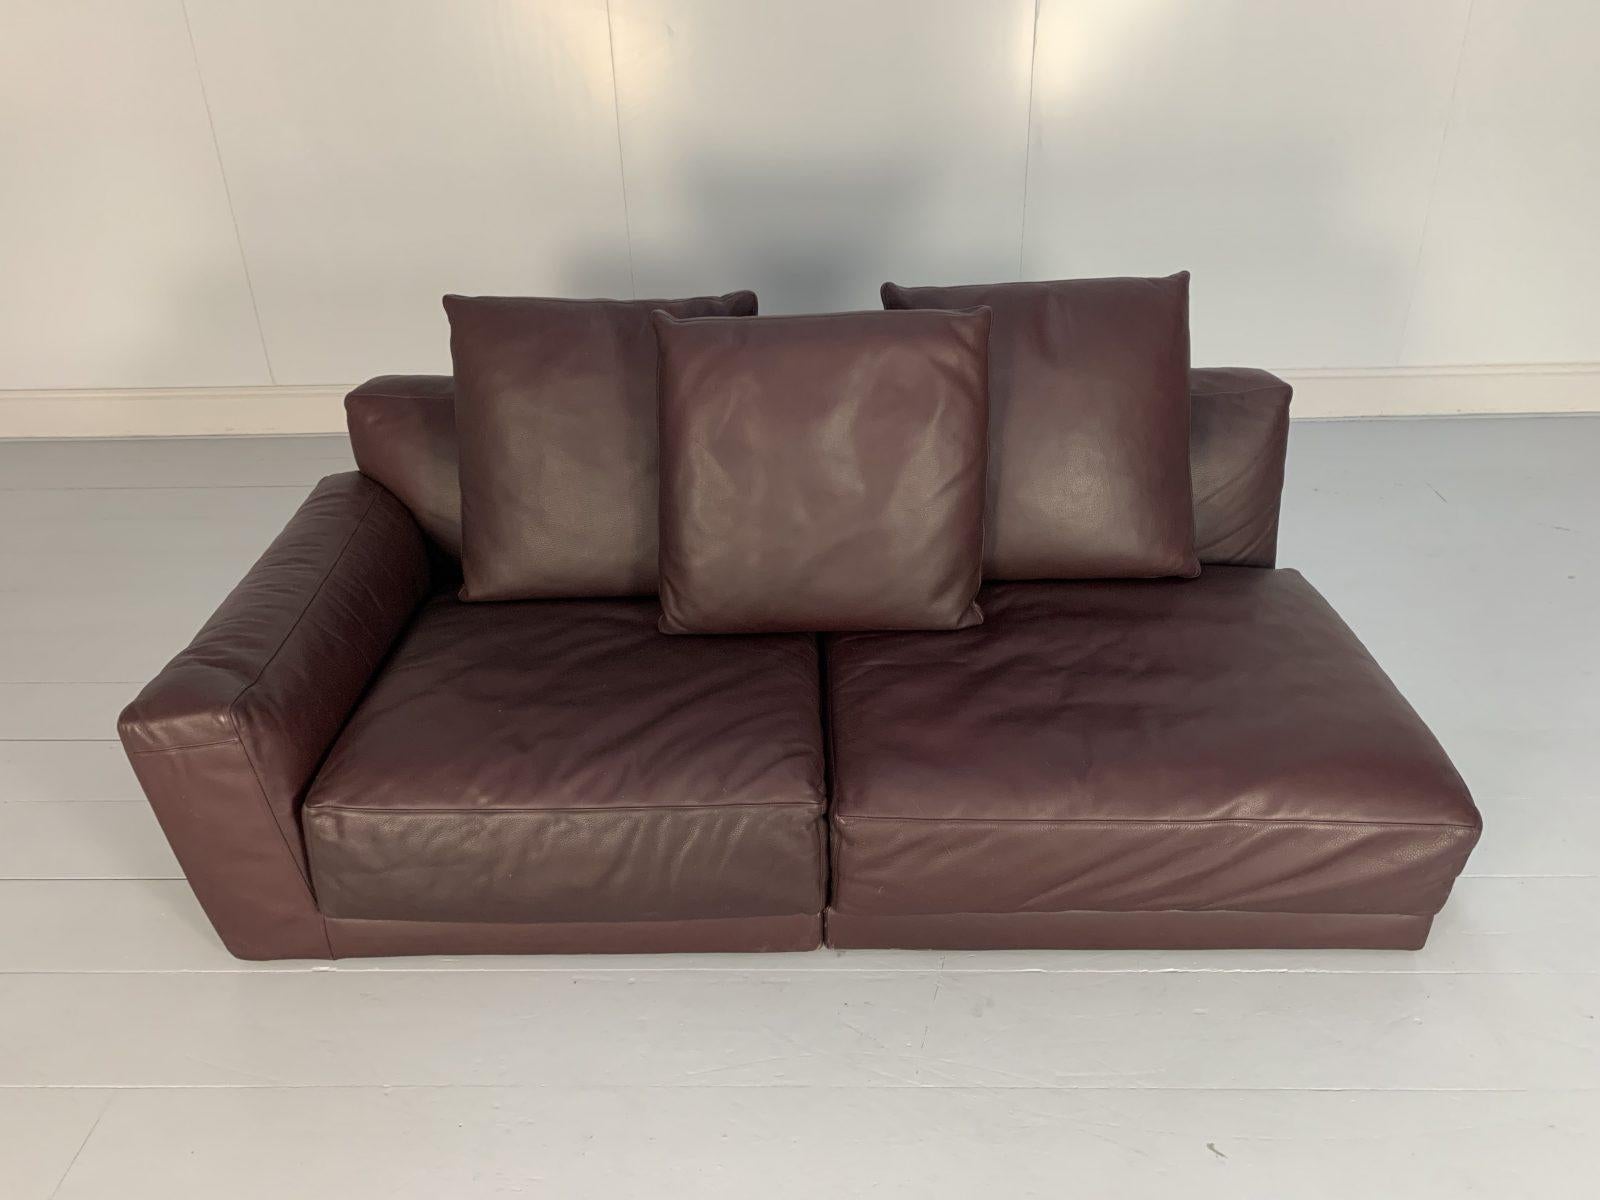 B&B Italia “Luis” 3-Seat Chaise-End Sofa in Oxblood Deep Red “Alfa” Leather In Good Condition For Sale In Barrowford, GB